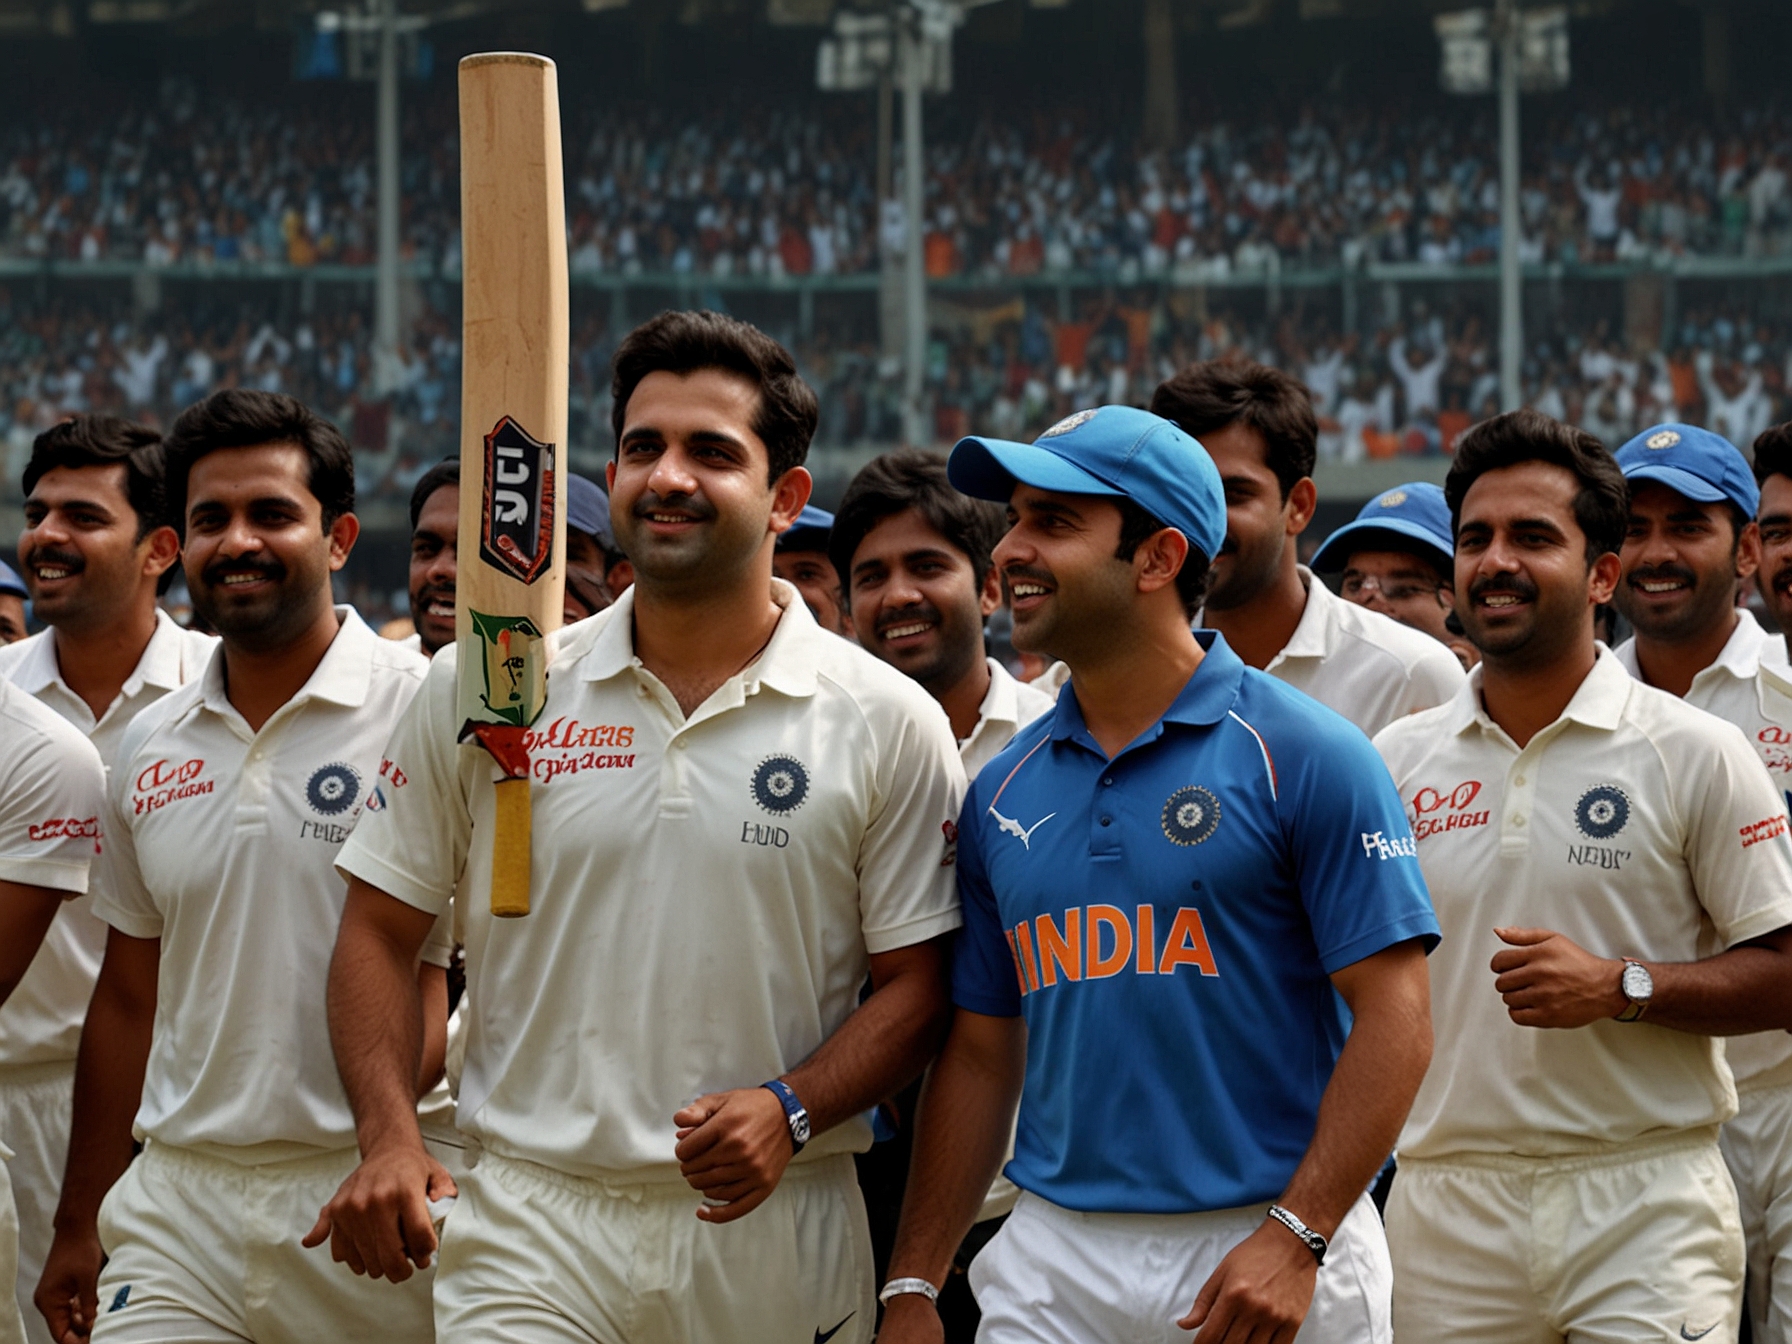 An image of an excited crowd in a cricket stadium with Team India players on the field, symbolizing the anticipation and support surrounding Gambhir's potential appointment as head coach.